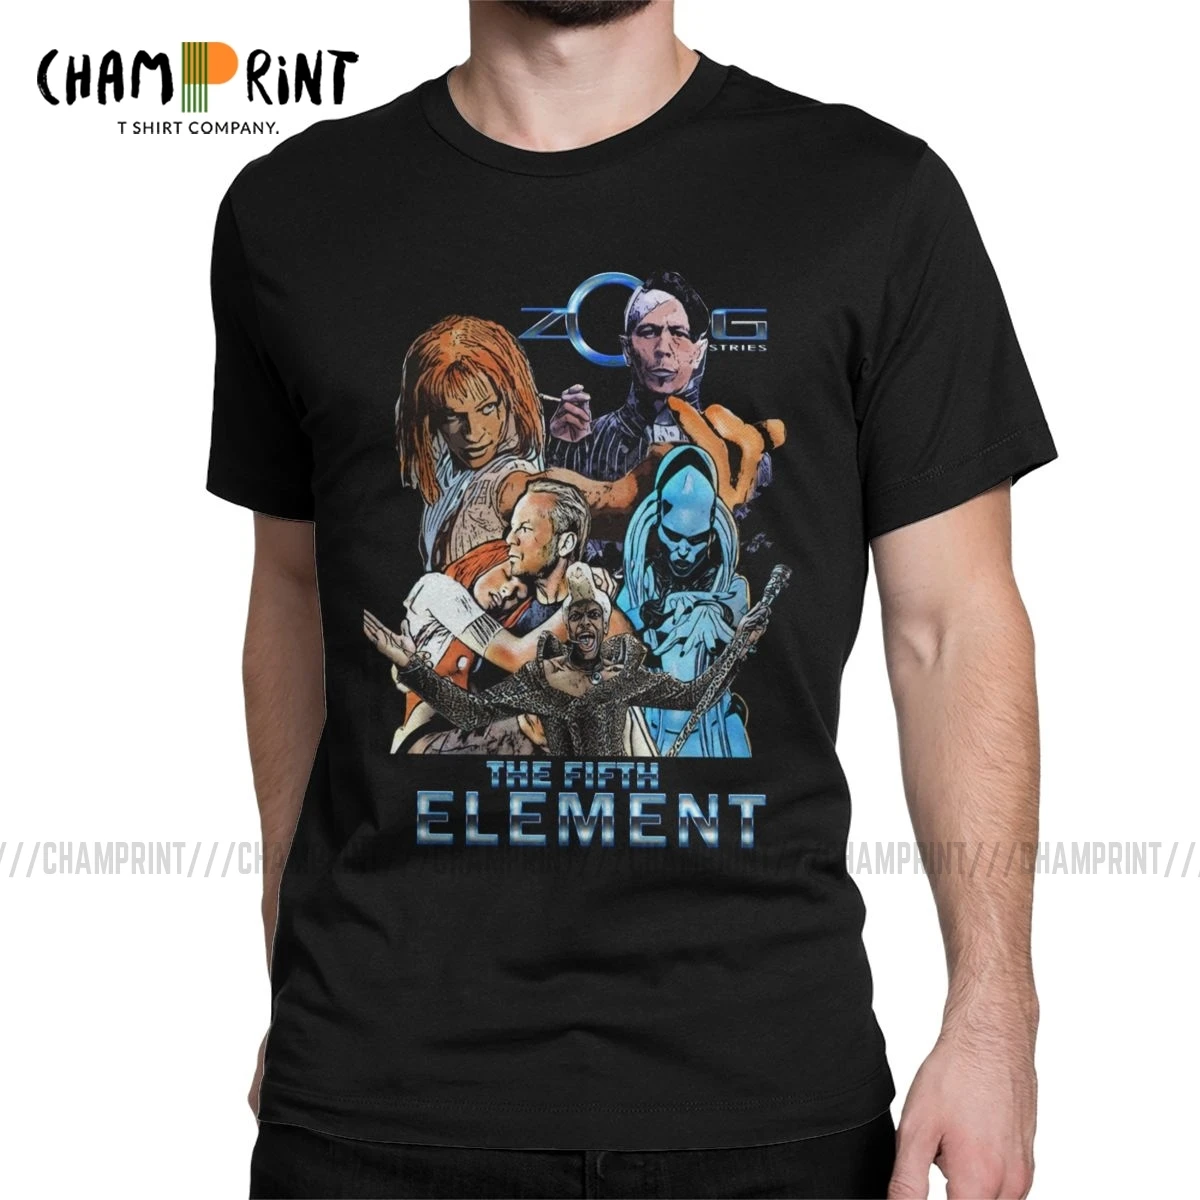 

The Fifth Element T Shirts for Men Cotton Casual T-Shirt O Neck Bruce Willis Sci Fi movie Tee Shirt Short Sleeve Tops Gift Idea